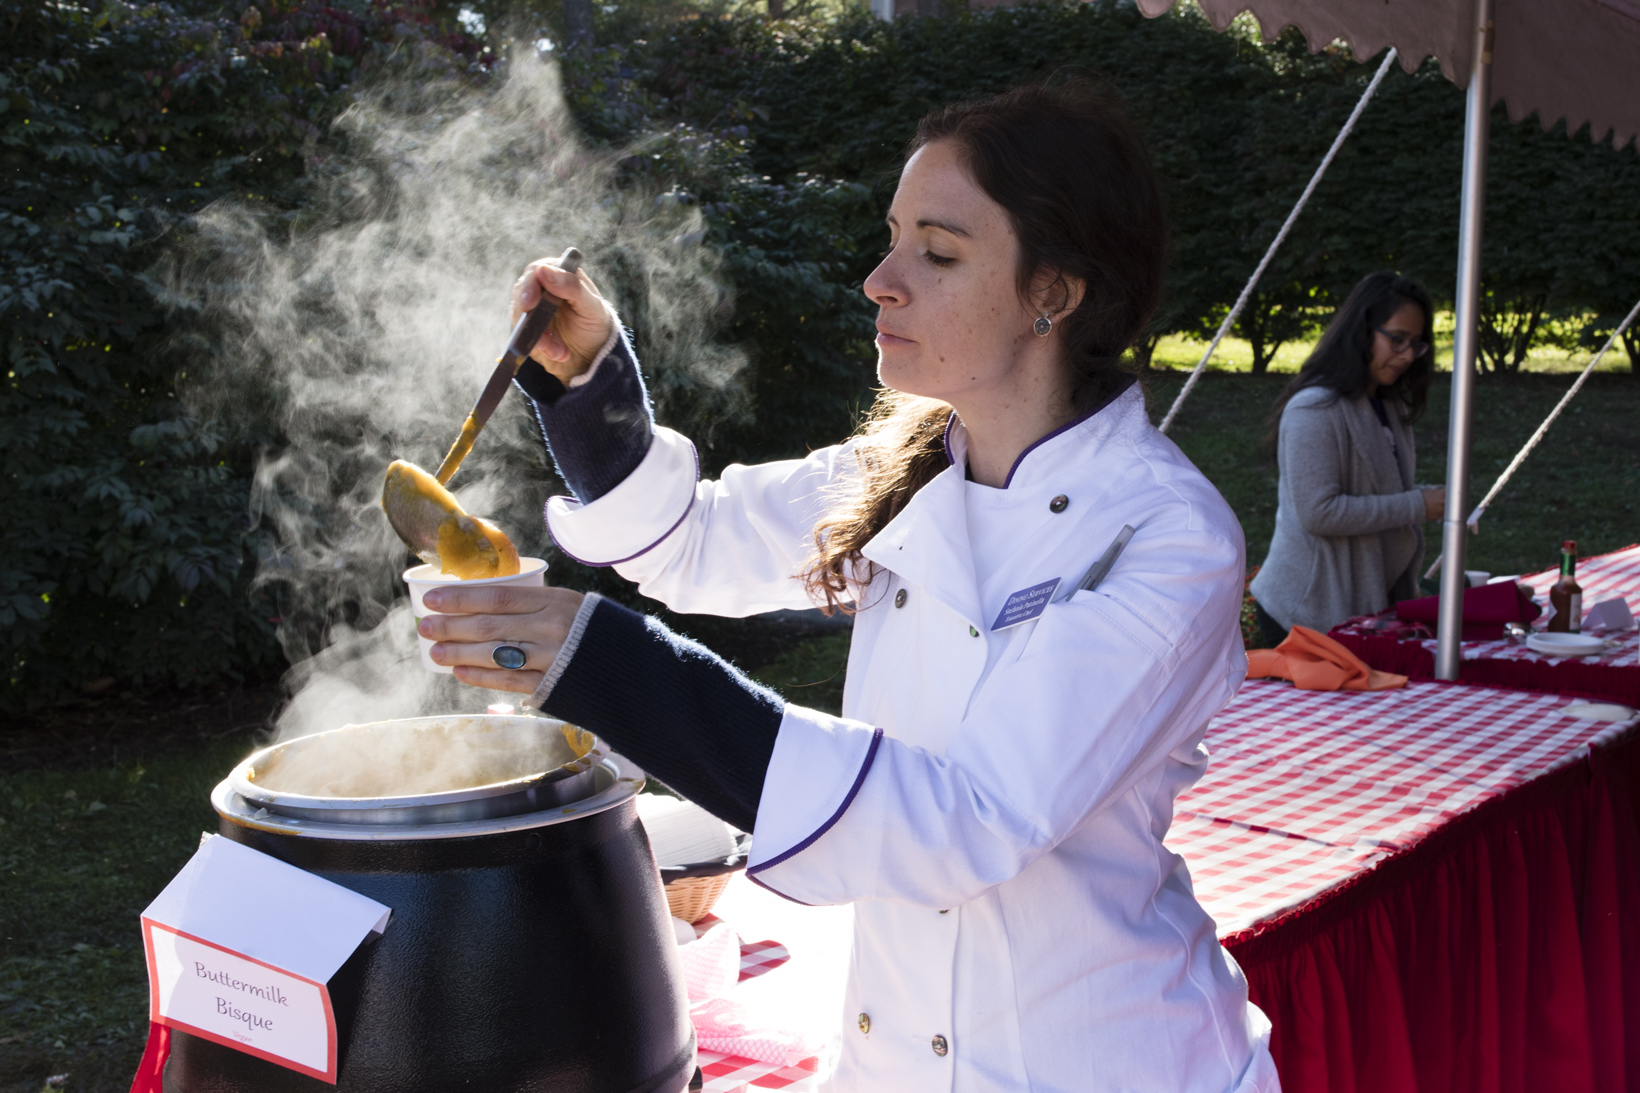 Stefania Patinella, the executive chef with the College’s Dining Services